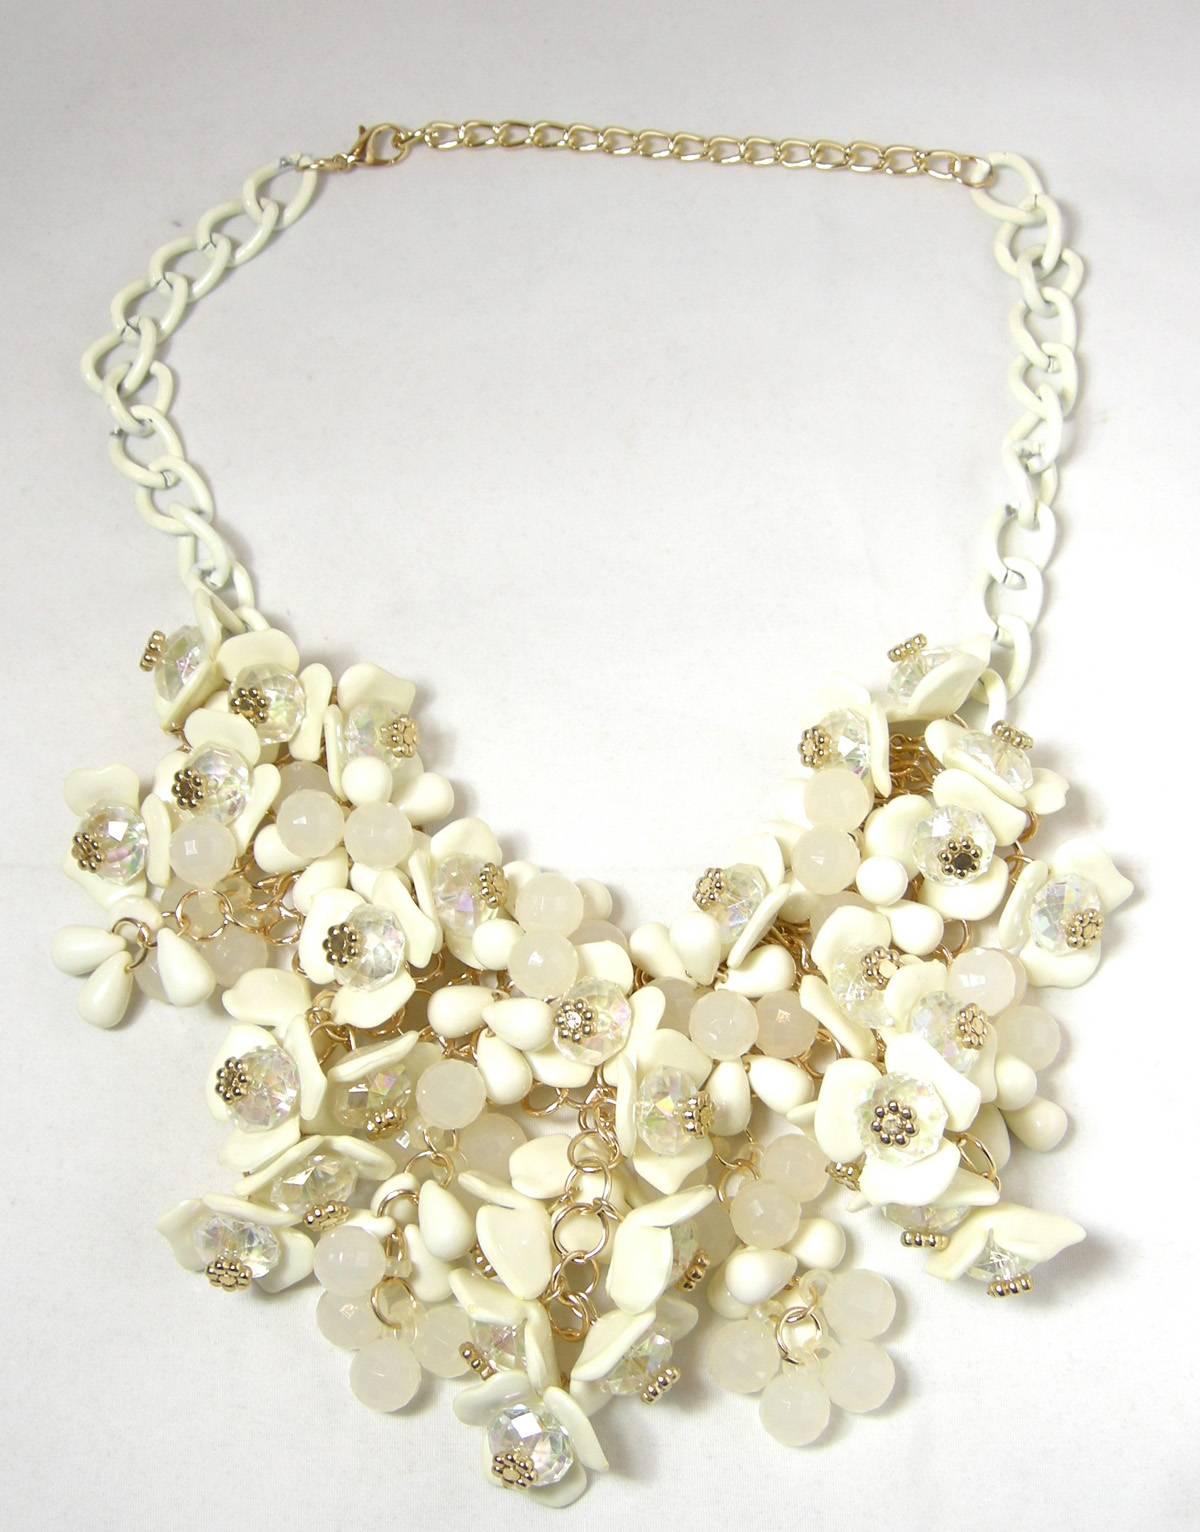 I love jewelry that you can wear anywhere … at any time.  This bib necklace has rows and rows of faux ivory flowers with Aurora Borealis centers with tiny gold tone flowers.  The bib is connected to a gold tone mesh backing with a white enamel open